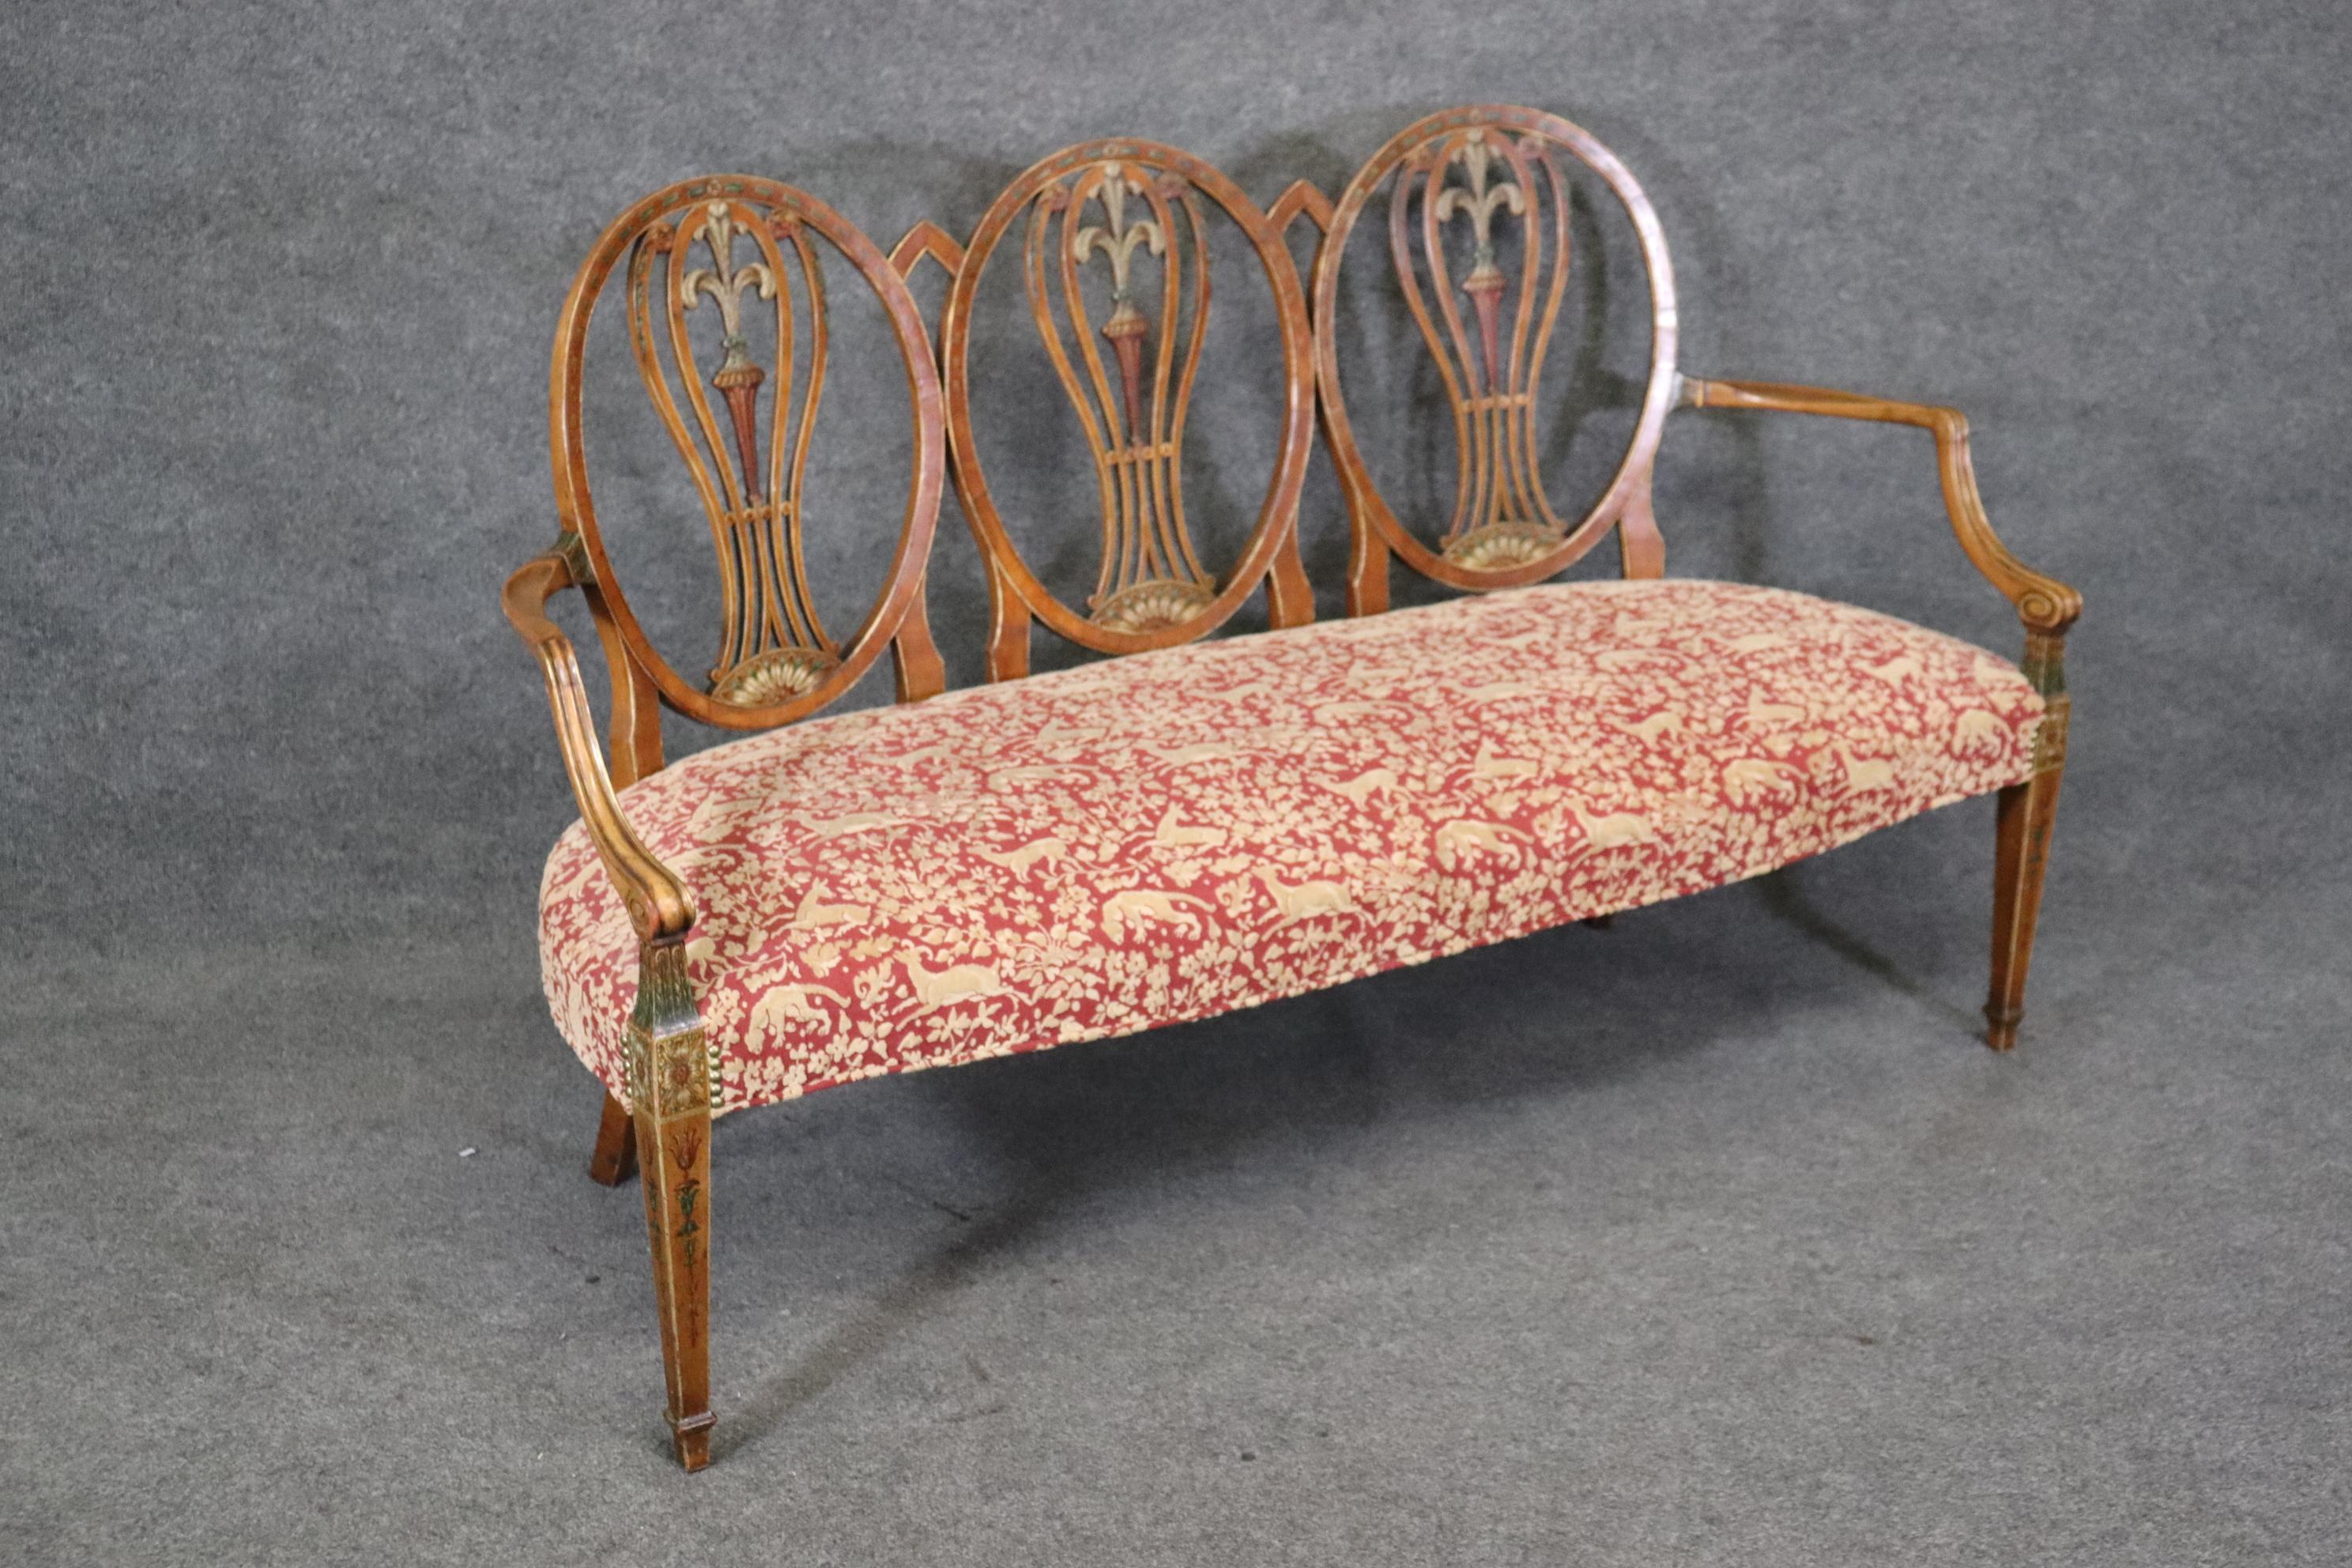 This is a fun and whimsical Adams settee with prancing deer on the upholstery and gorgeous painted decoration on the frame. The settee is a rare model with triple ovals and is a great size, a hard size to find. The settee measures 38 tall x 61.75